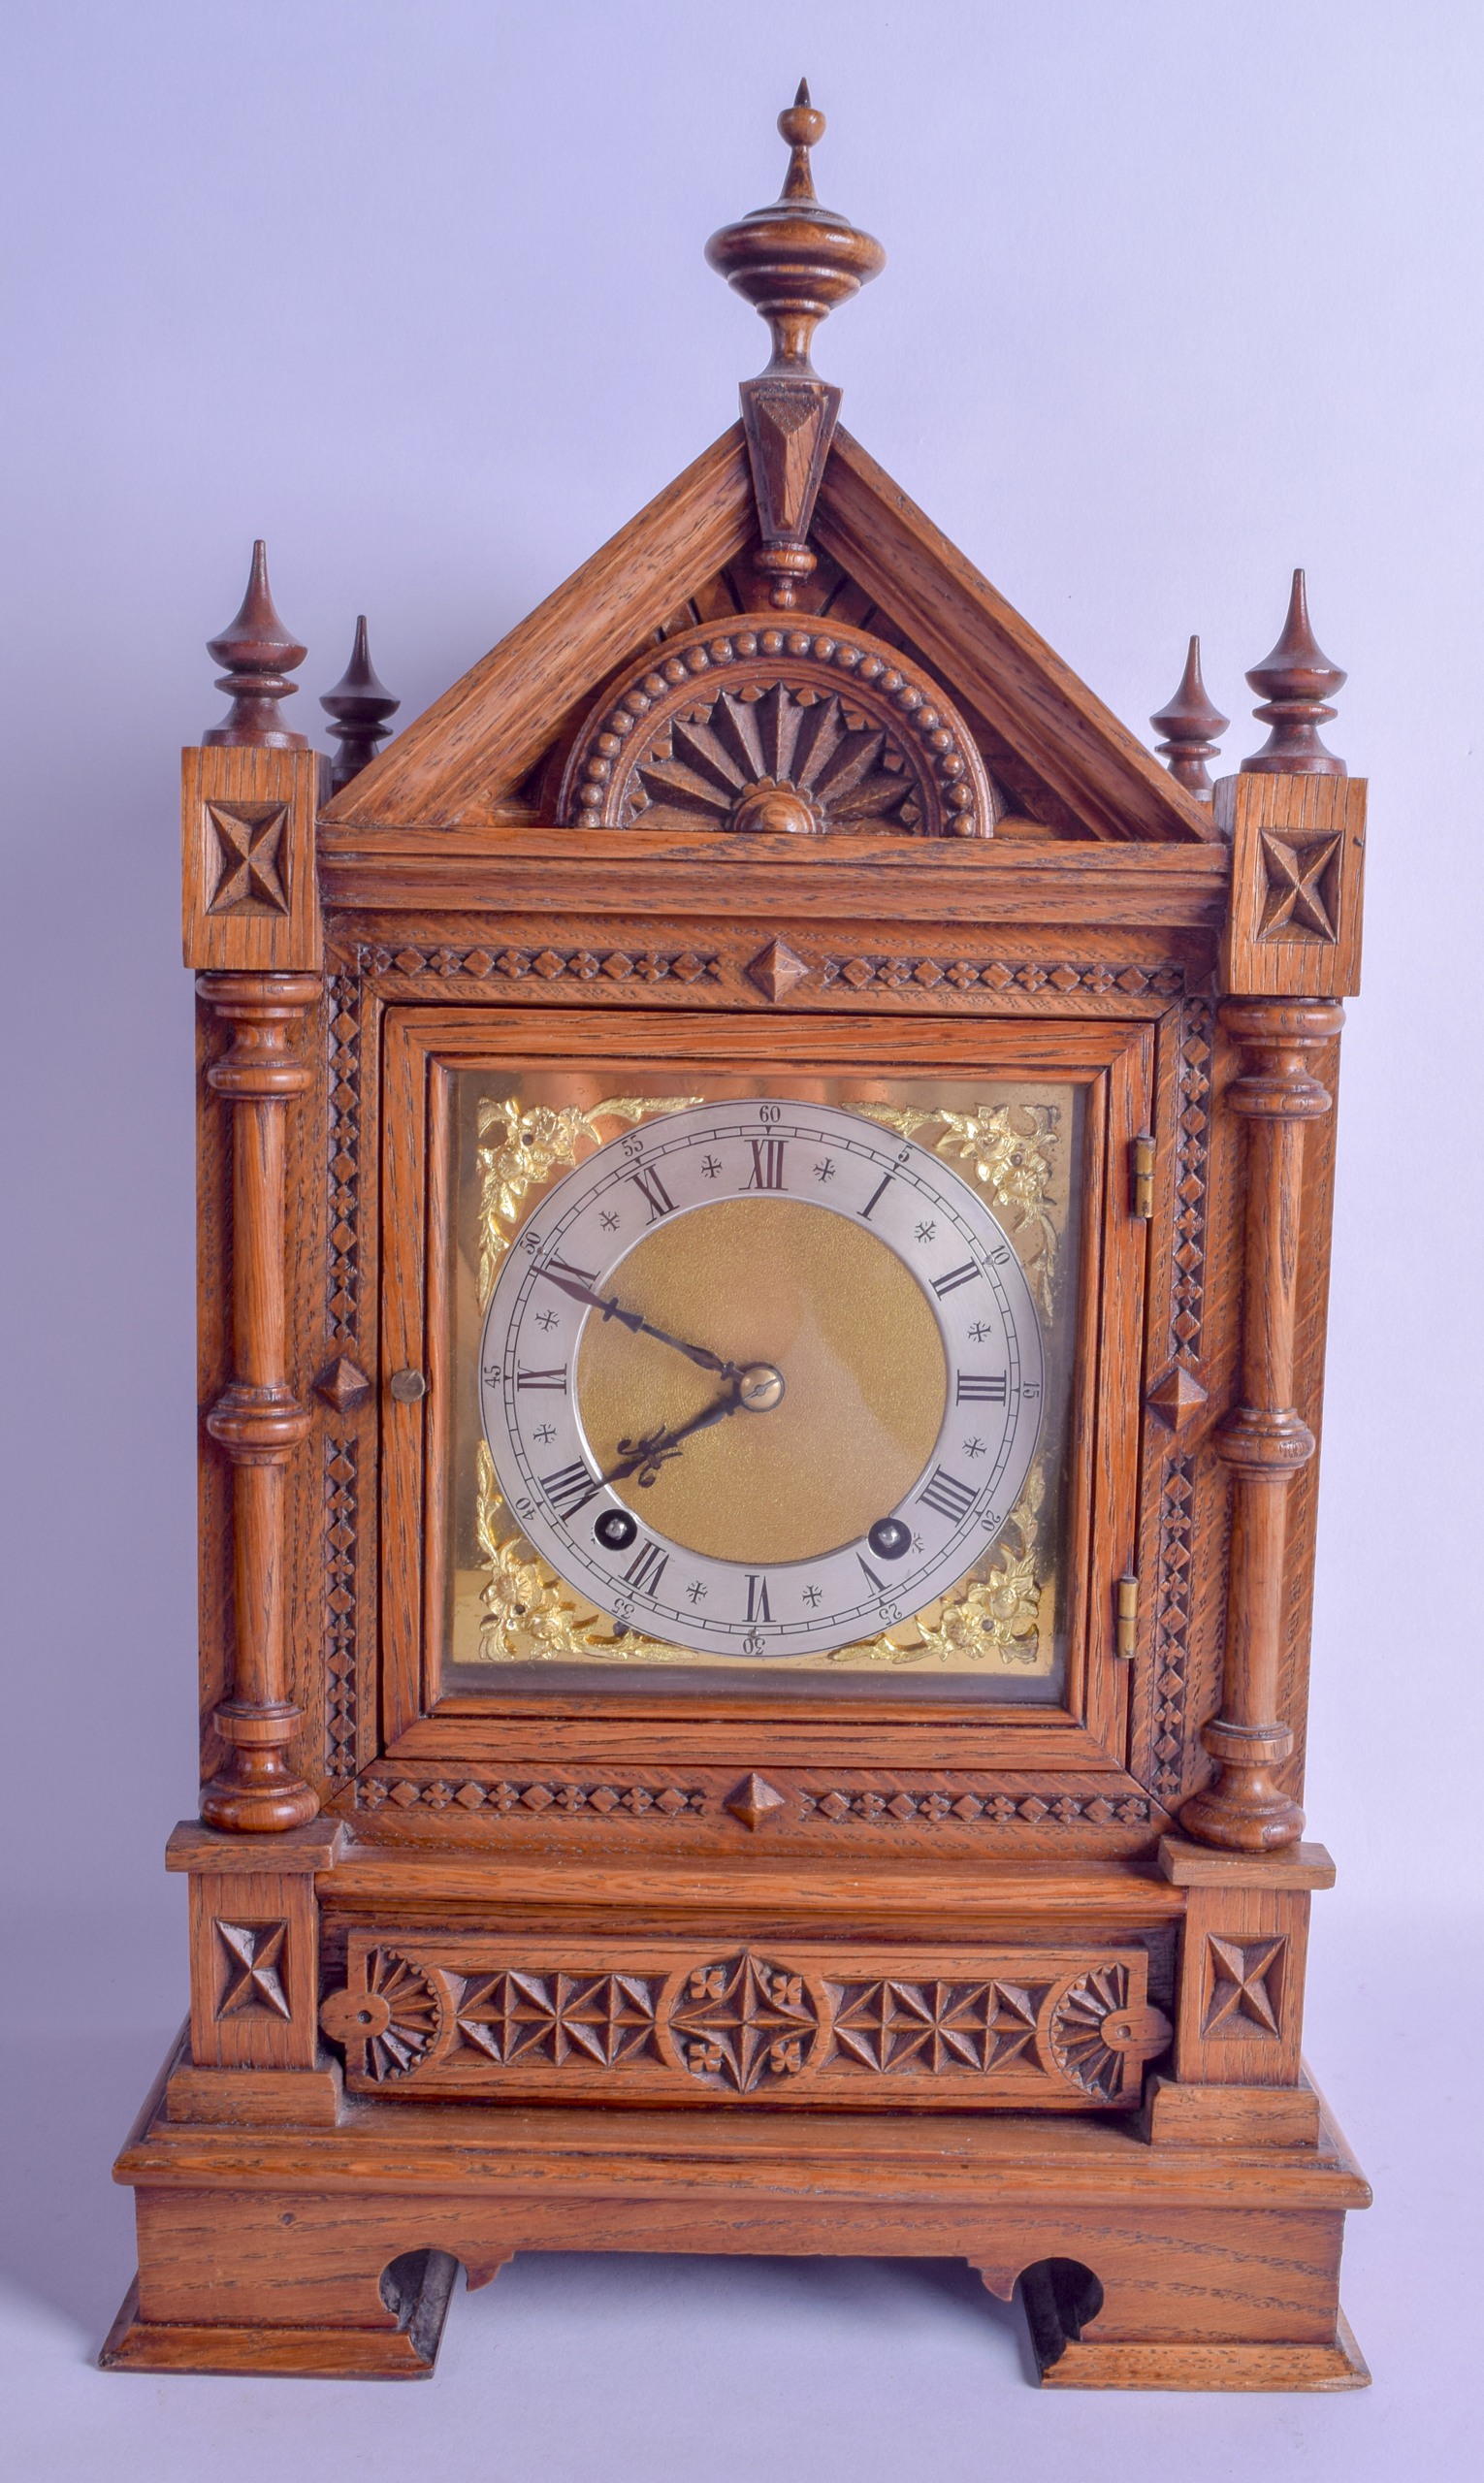 A LATE 19TH CENTURY GOTHIC REVIVAL CARVED OAK MANTEL CLOCK of architectural form, with brass mounted